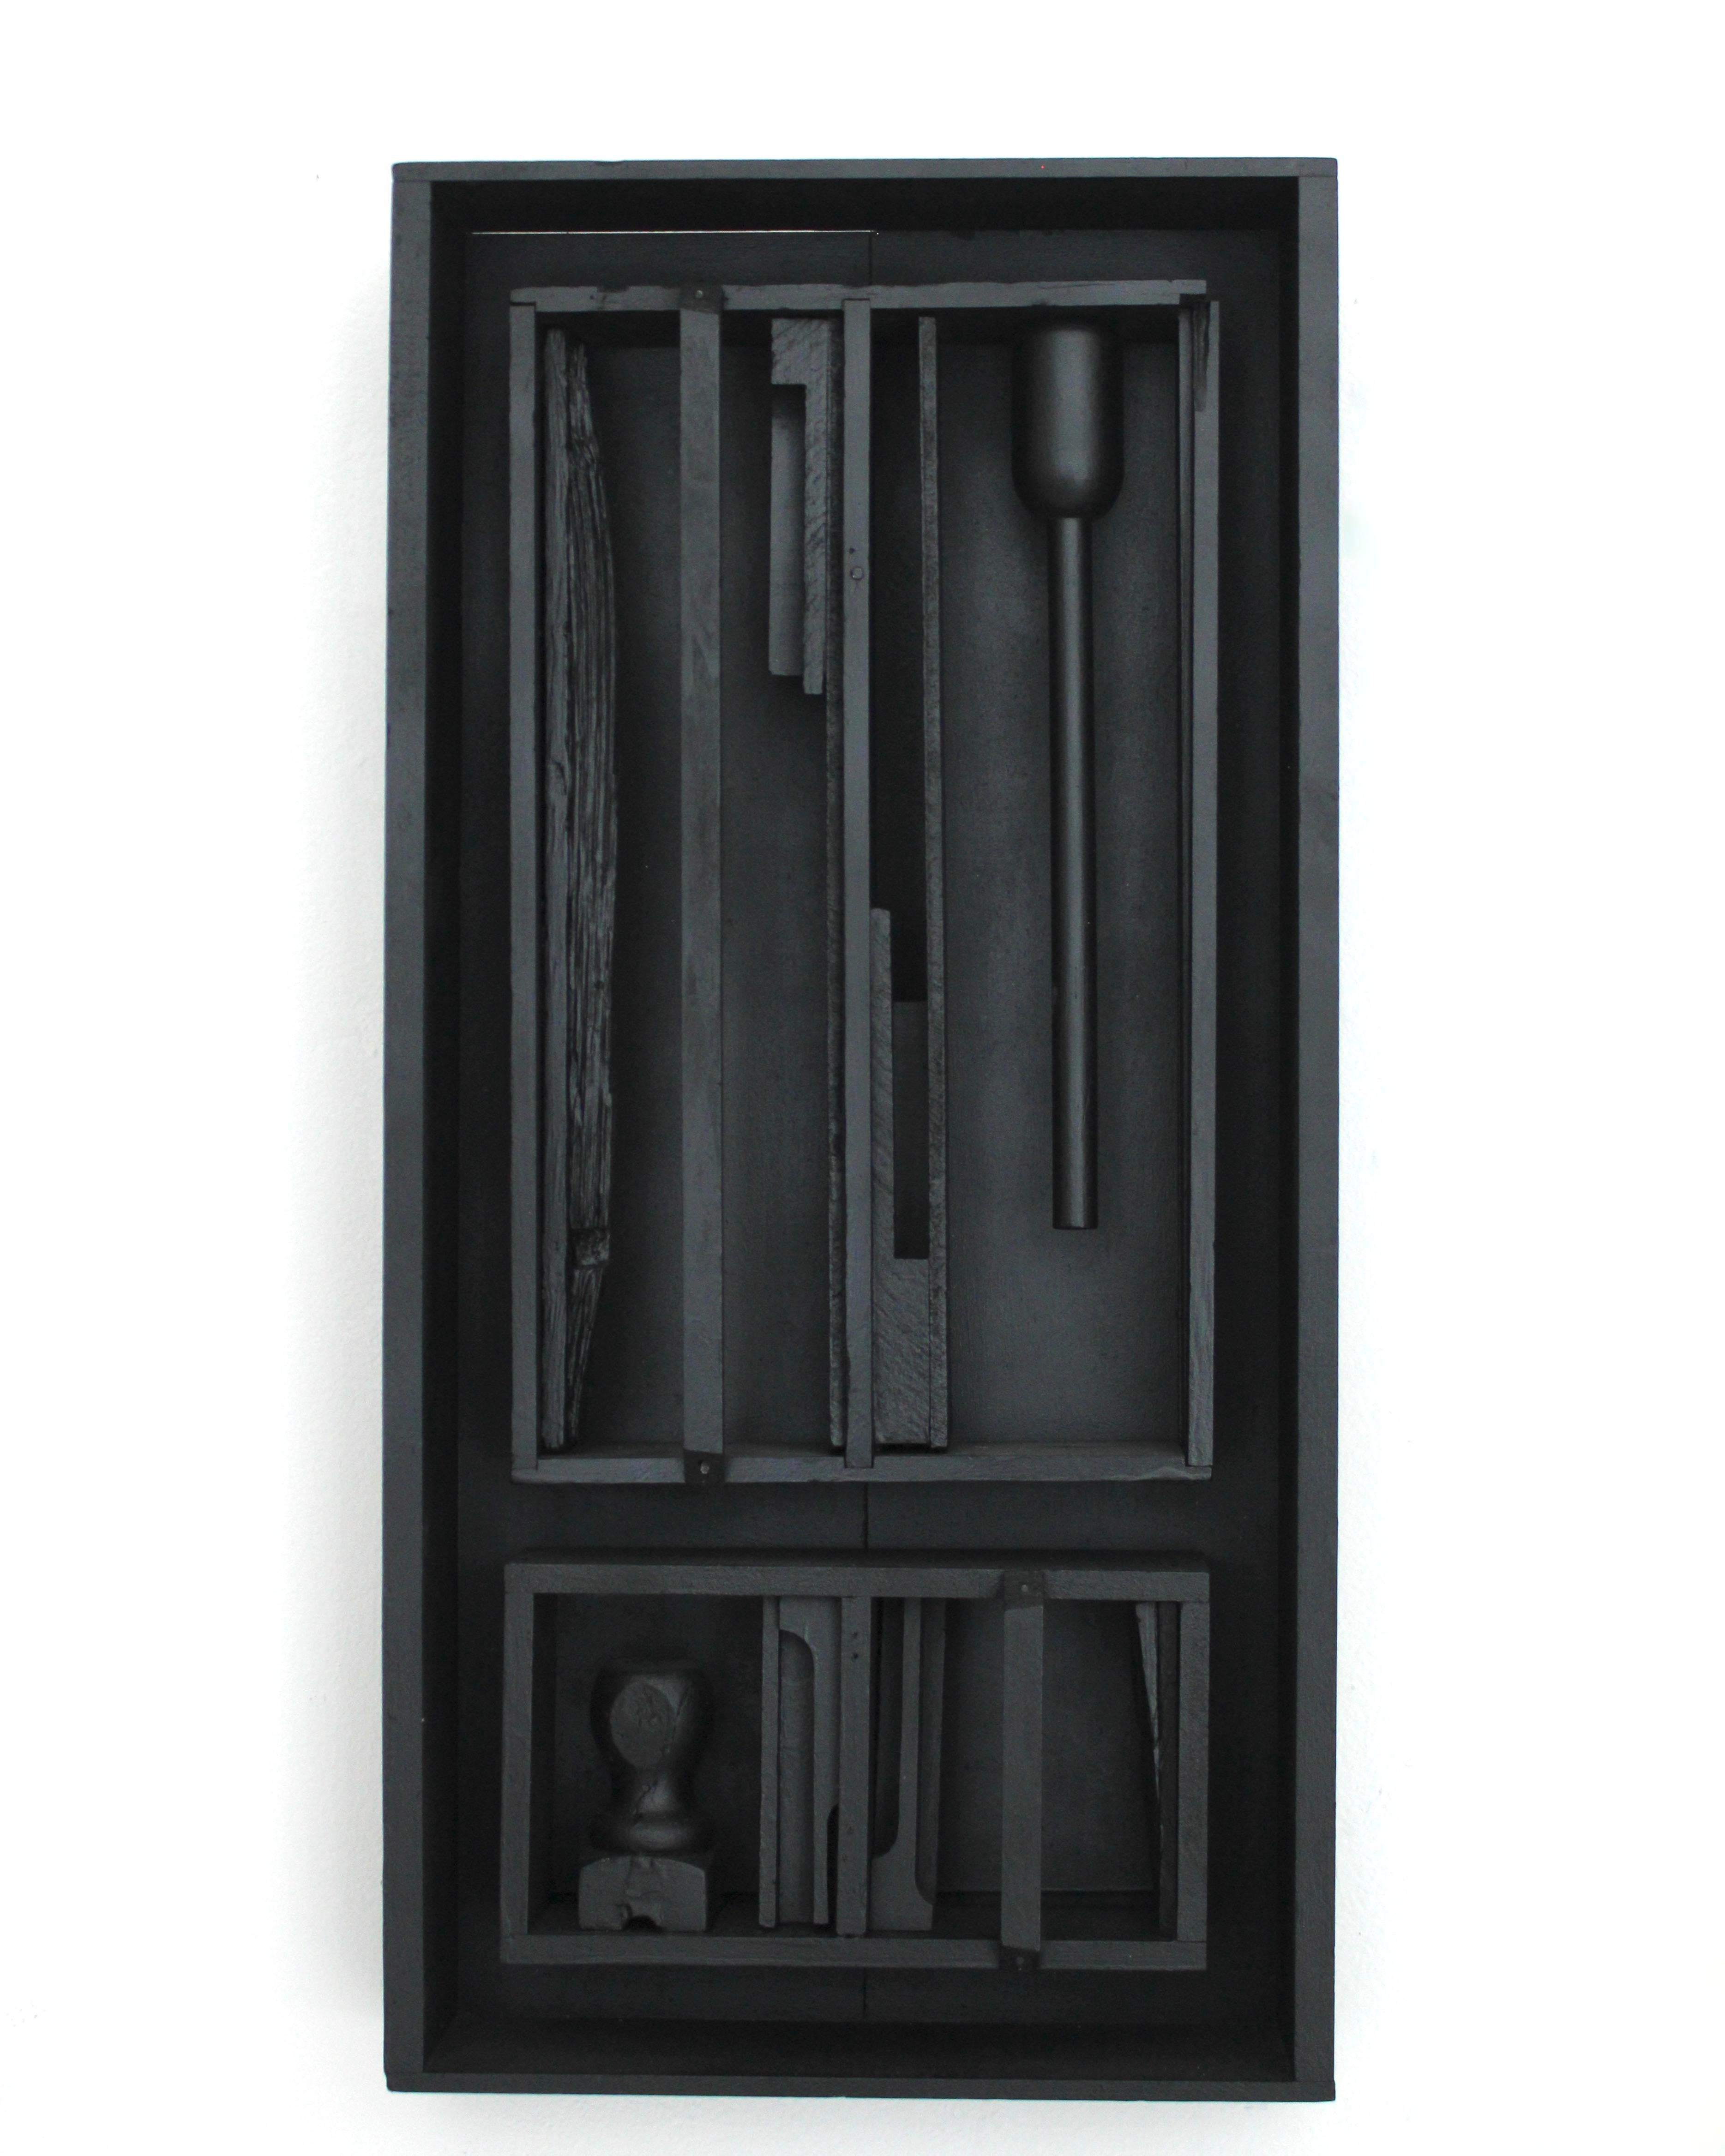 Clem Pennington in the style of Louise Nevelson black painted assemblage wood sculpture. 
The photos are slightly overexposed to show the sculptures details. 

Measures: 12”W X 3.5”D X 24.5”H.